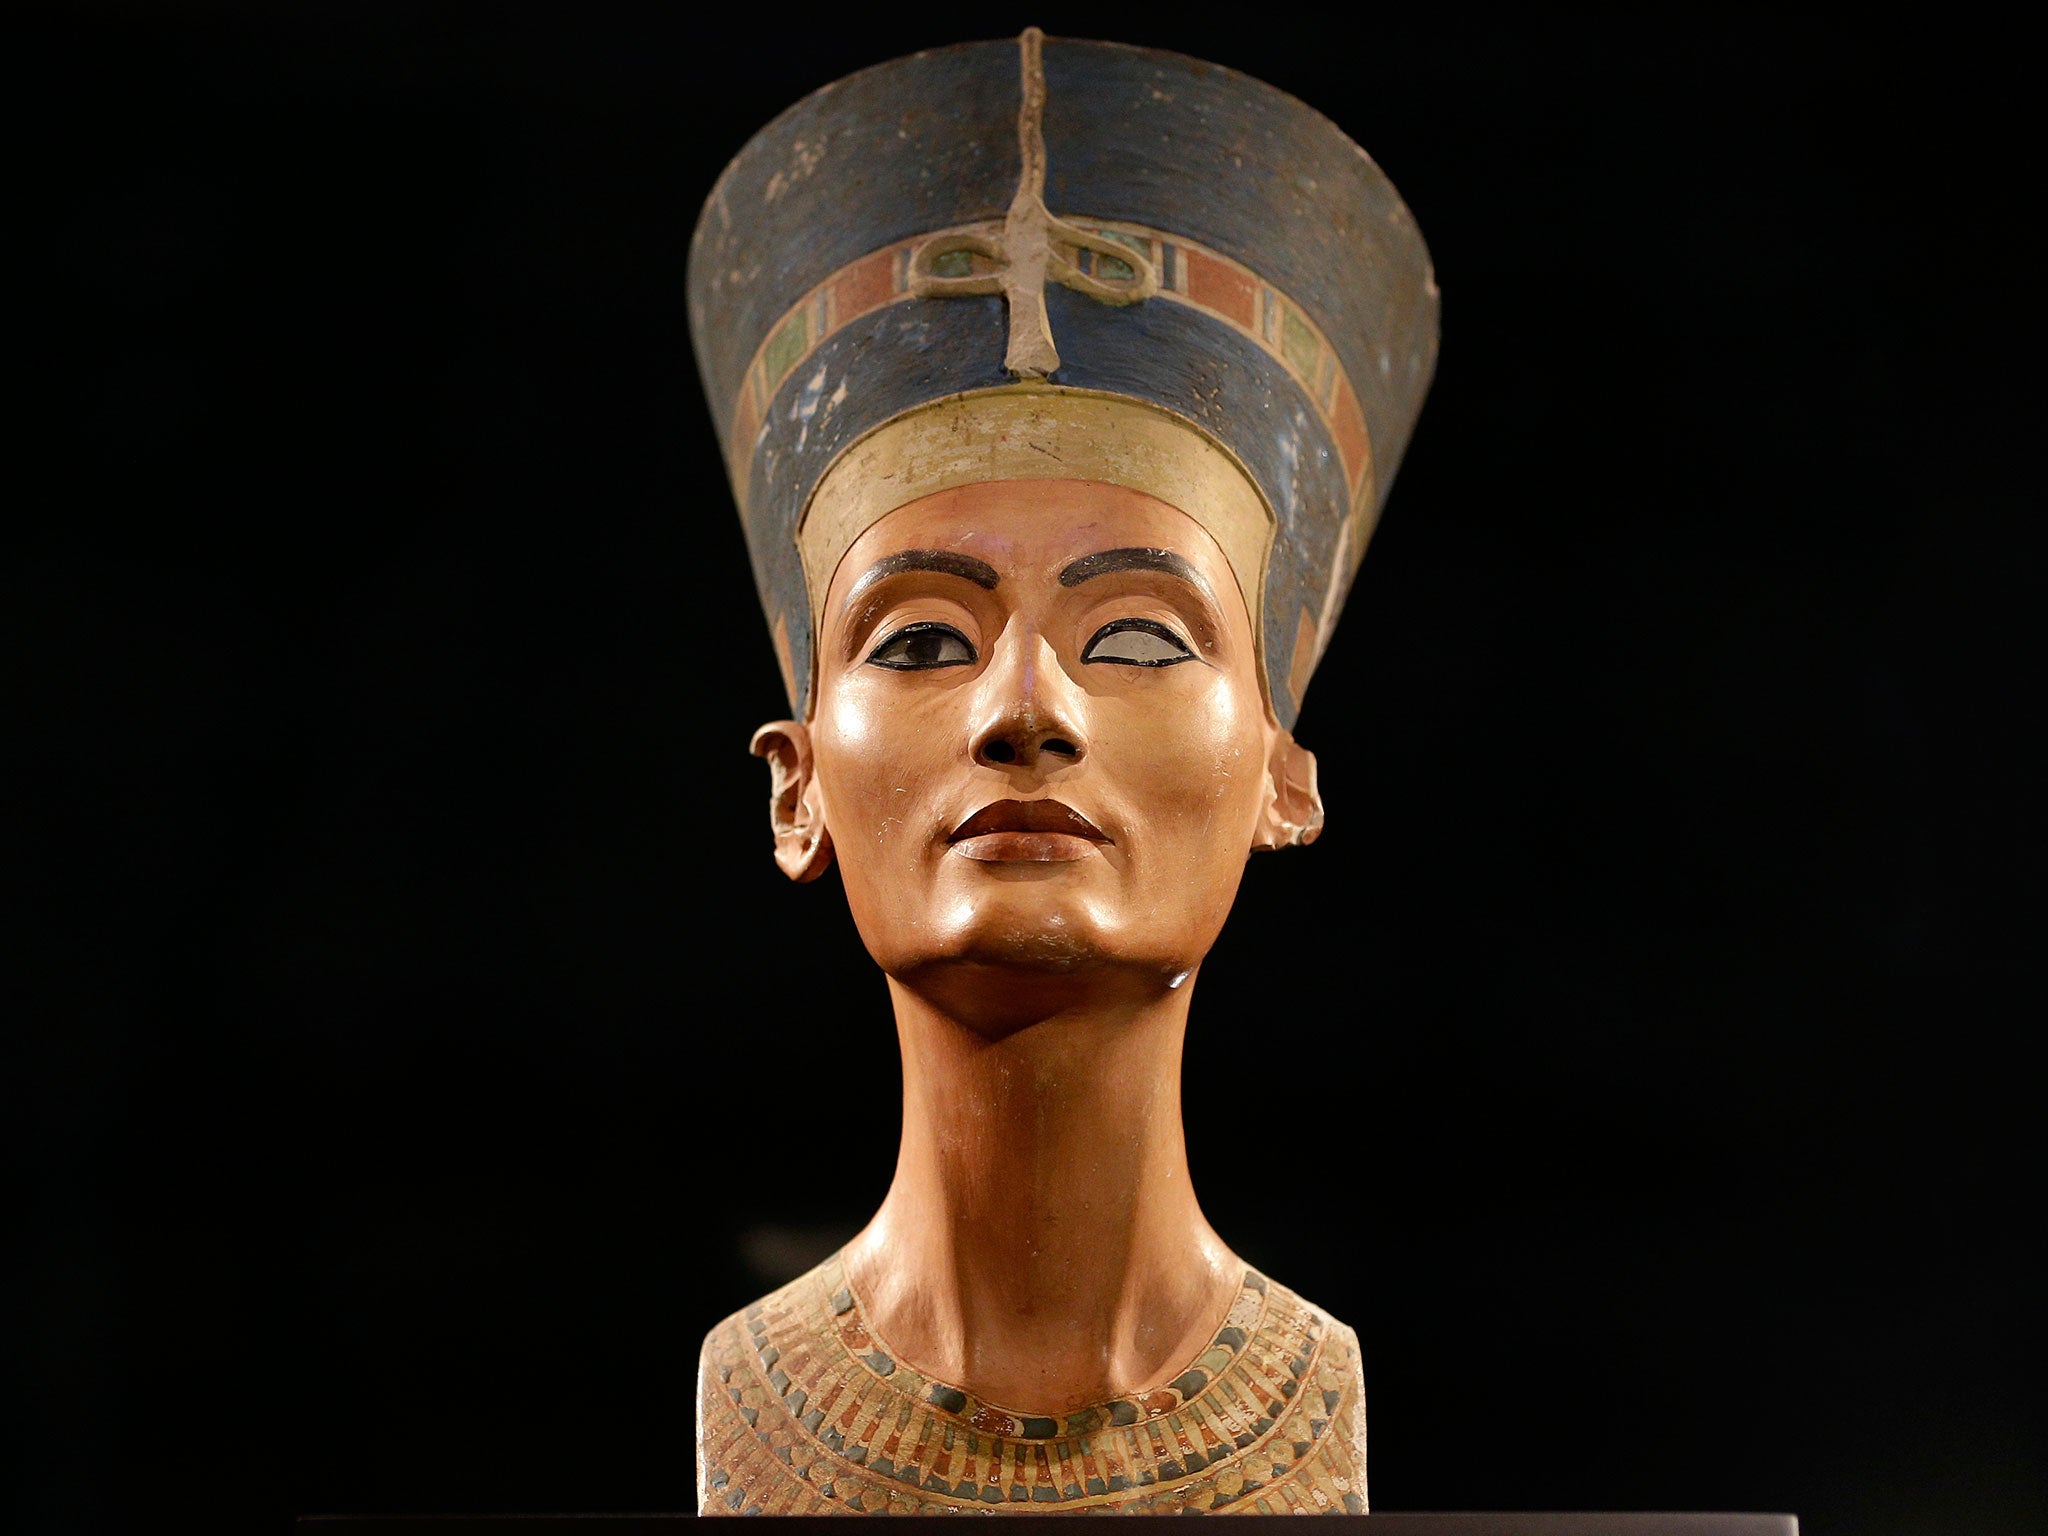 A bust of Nefertiti in the Neues Museum in Berlin. The queen’s tomb has never been found